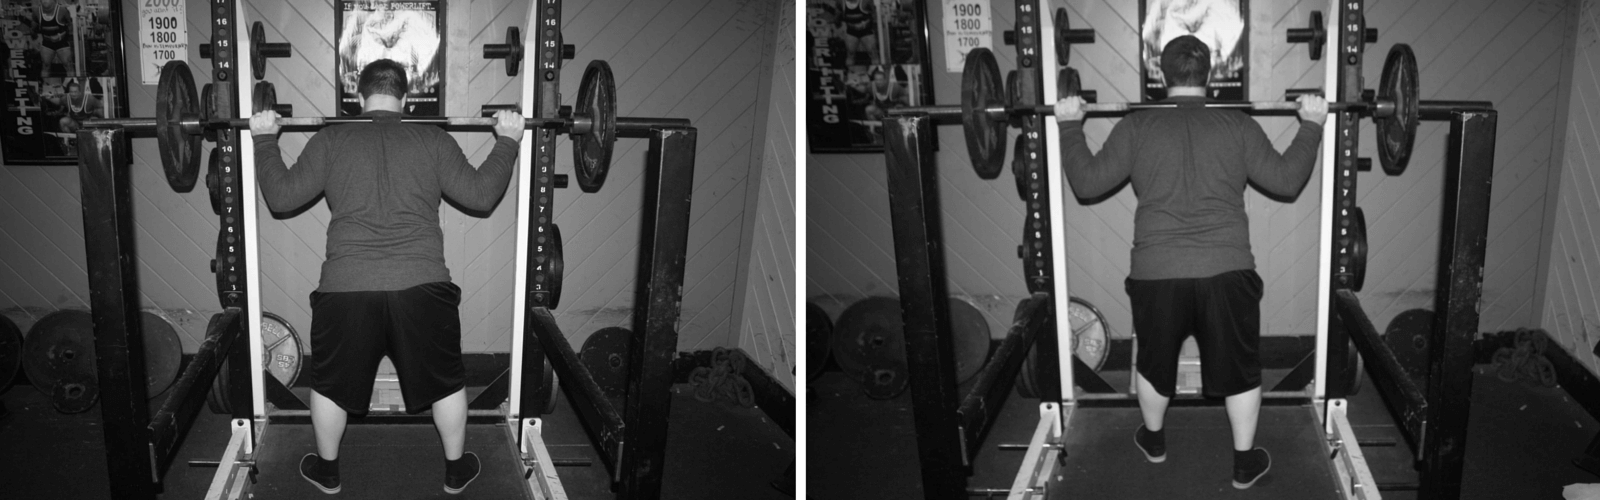 Squat vs. Staggered Stance